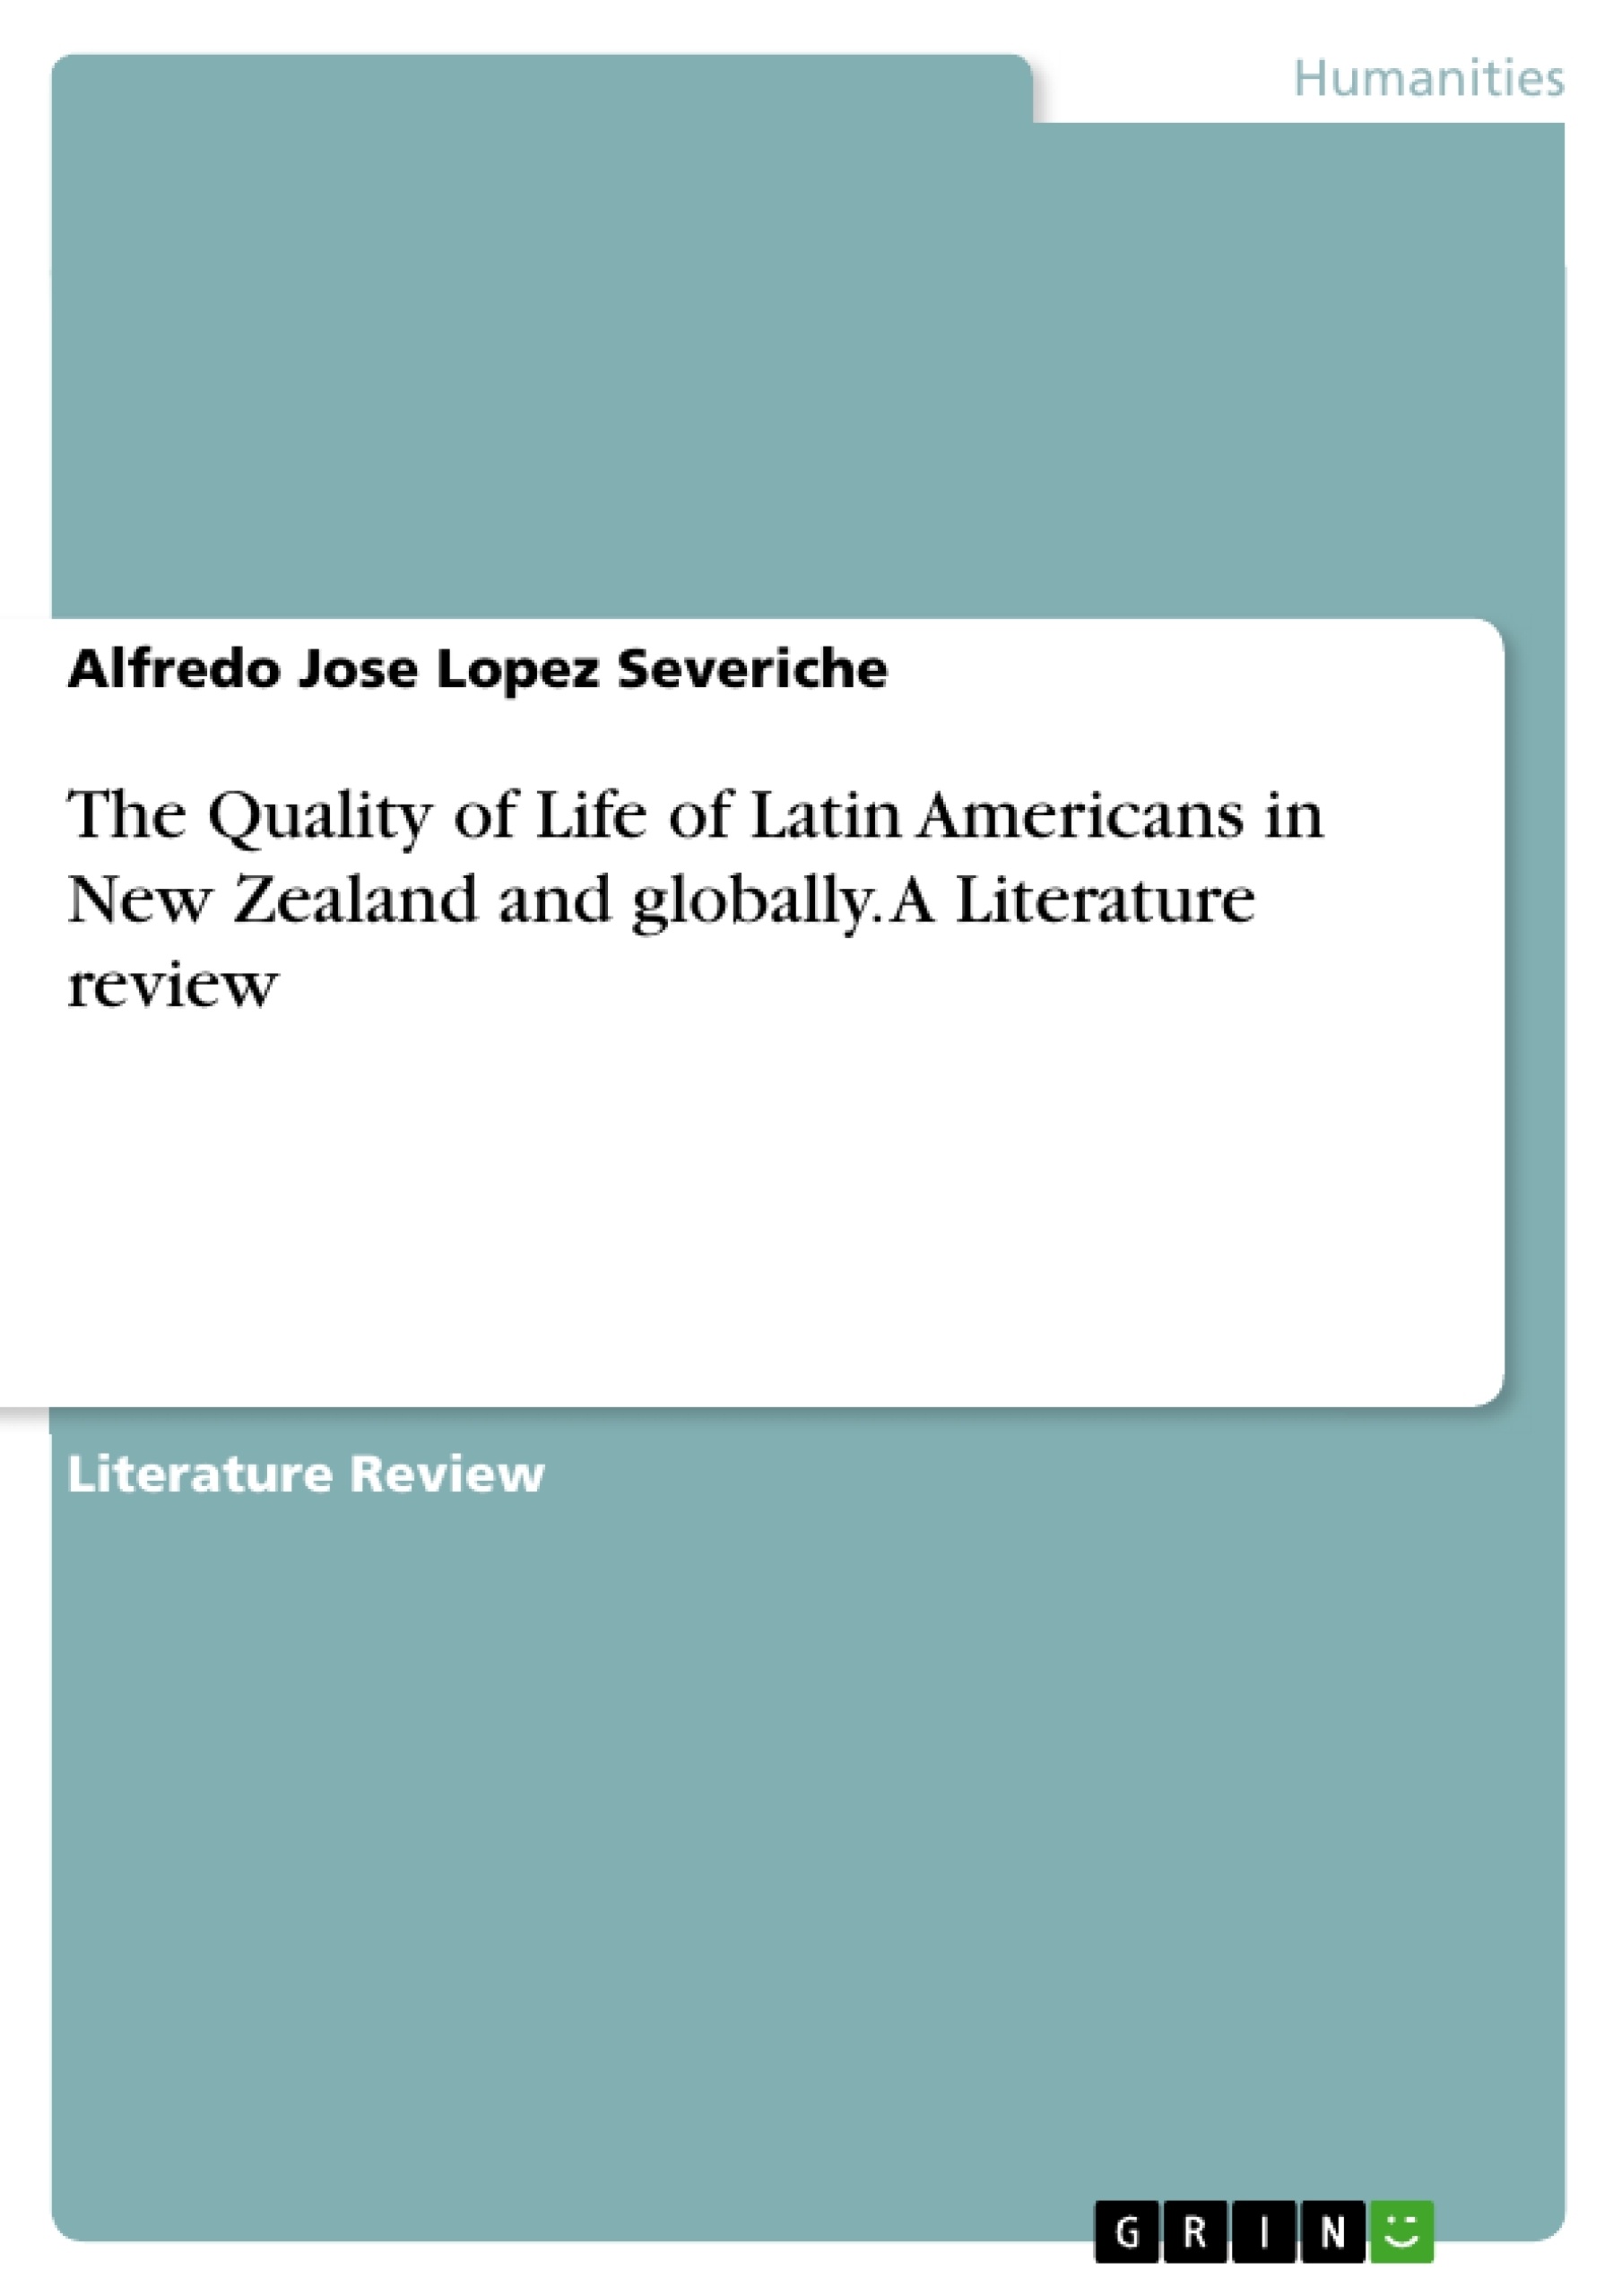 Title: The Quality of Life of Latin Americans in New Zealand and globally. A Literature review